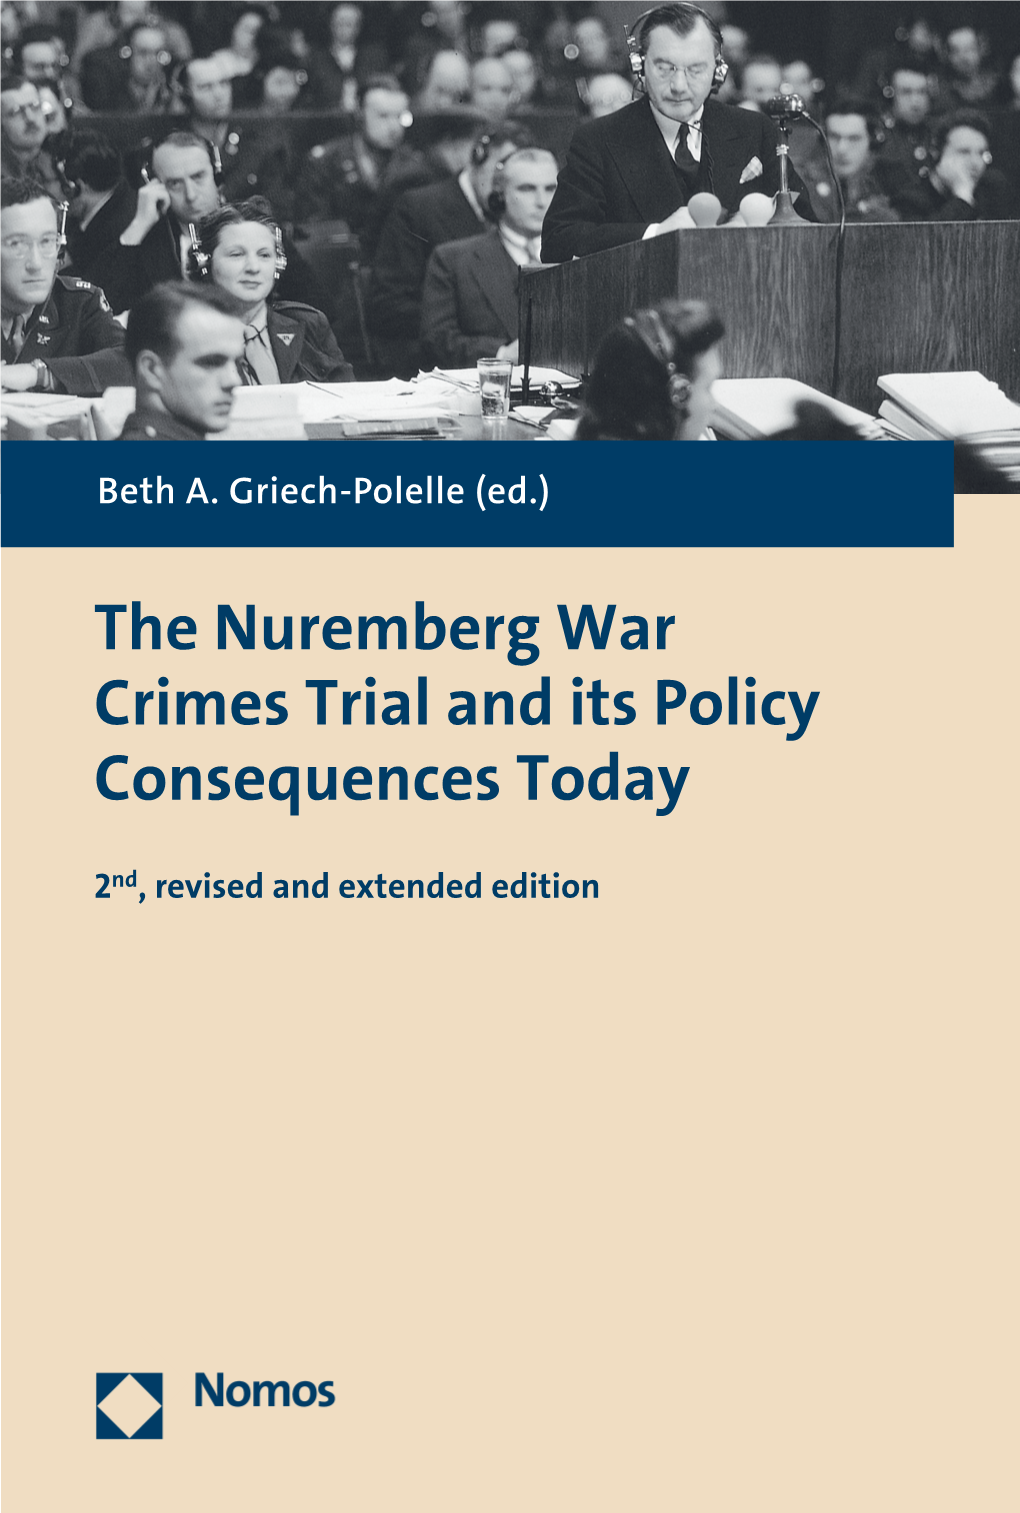 The Nuremberg War Crimes Trial and Its Policy Consequences Today